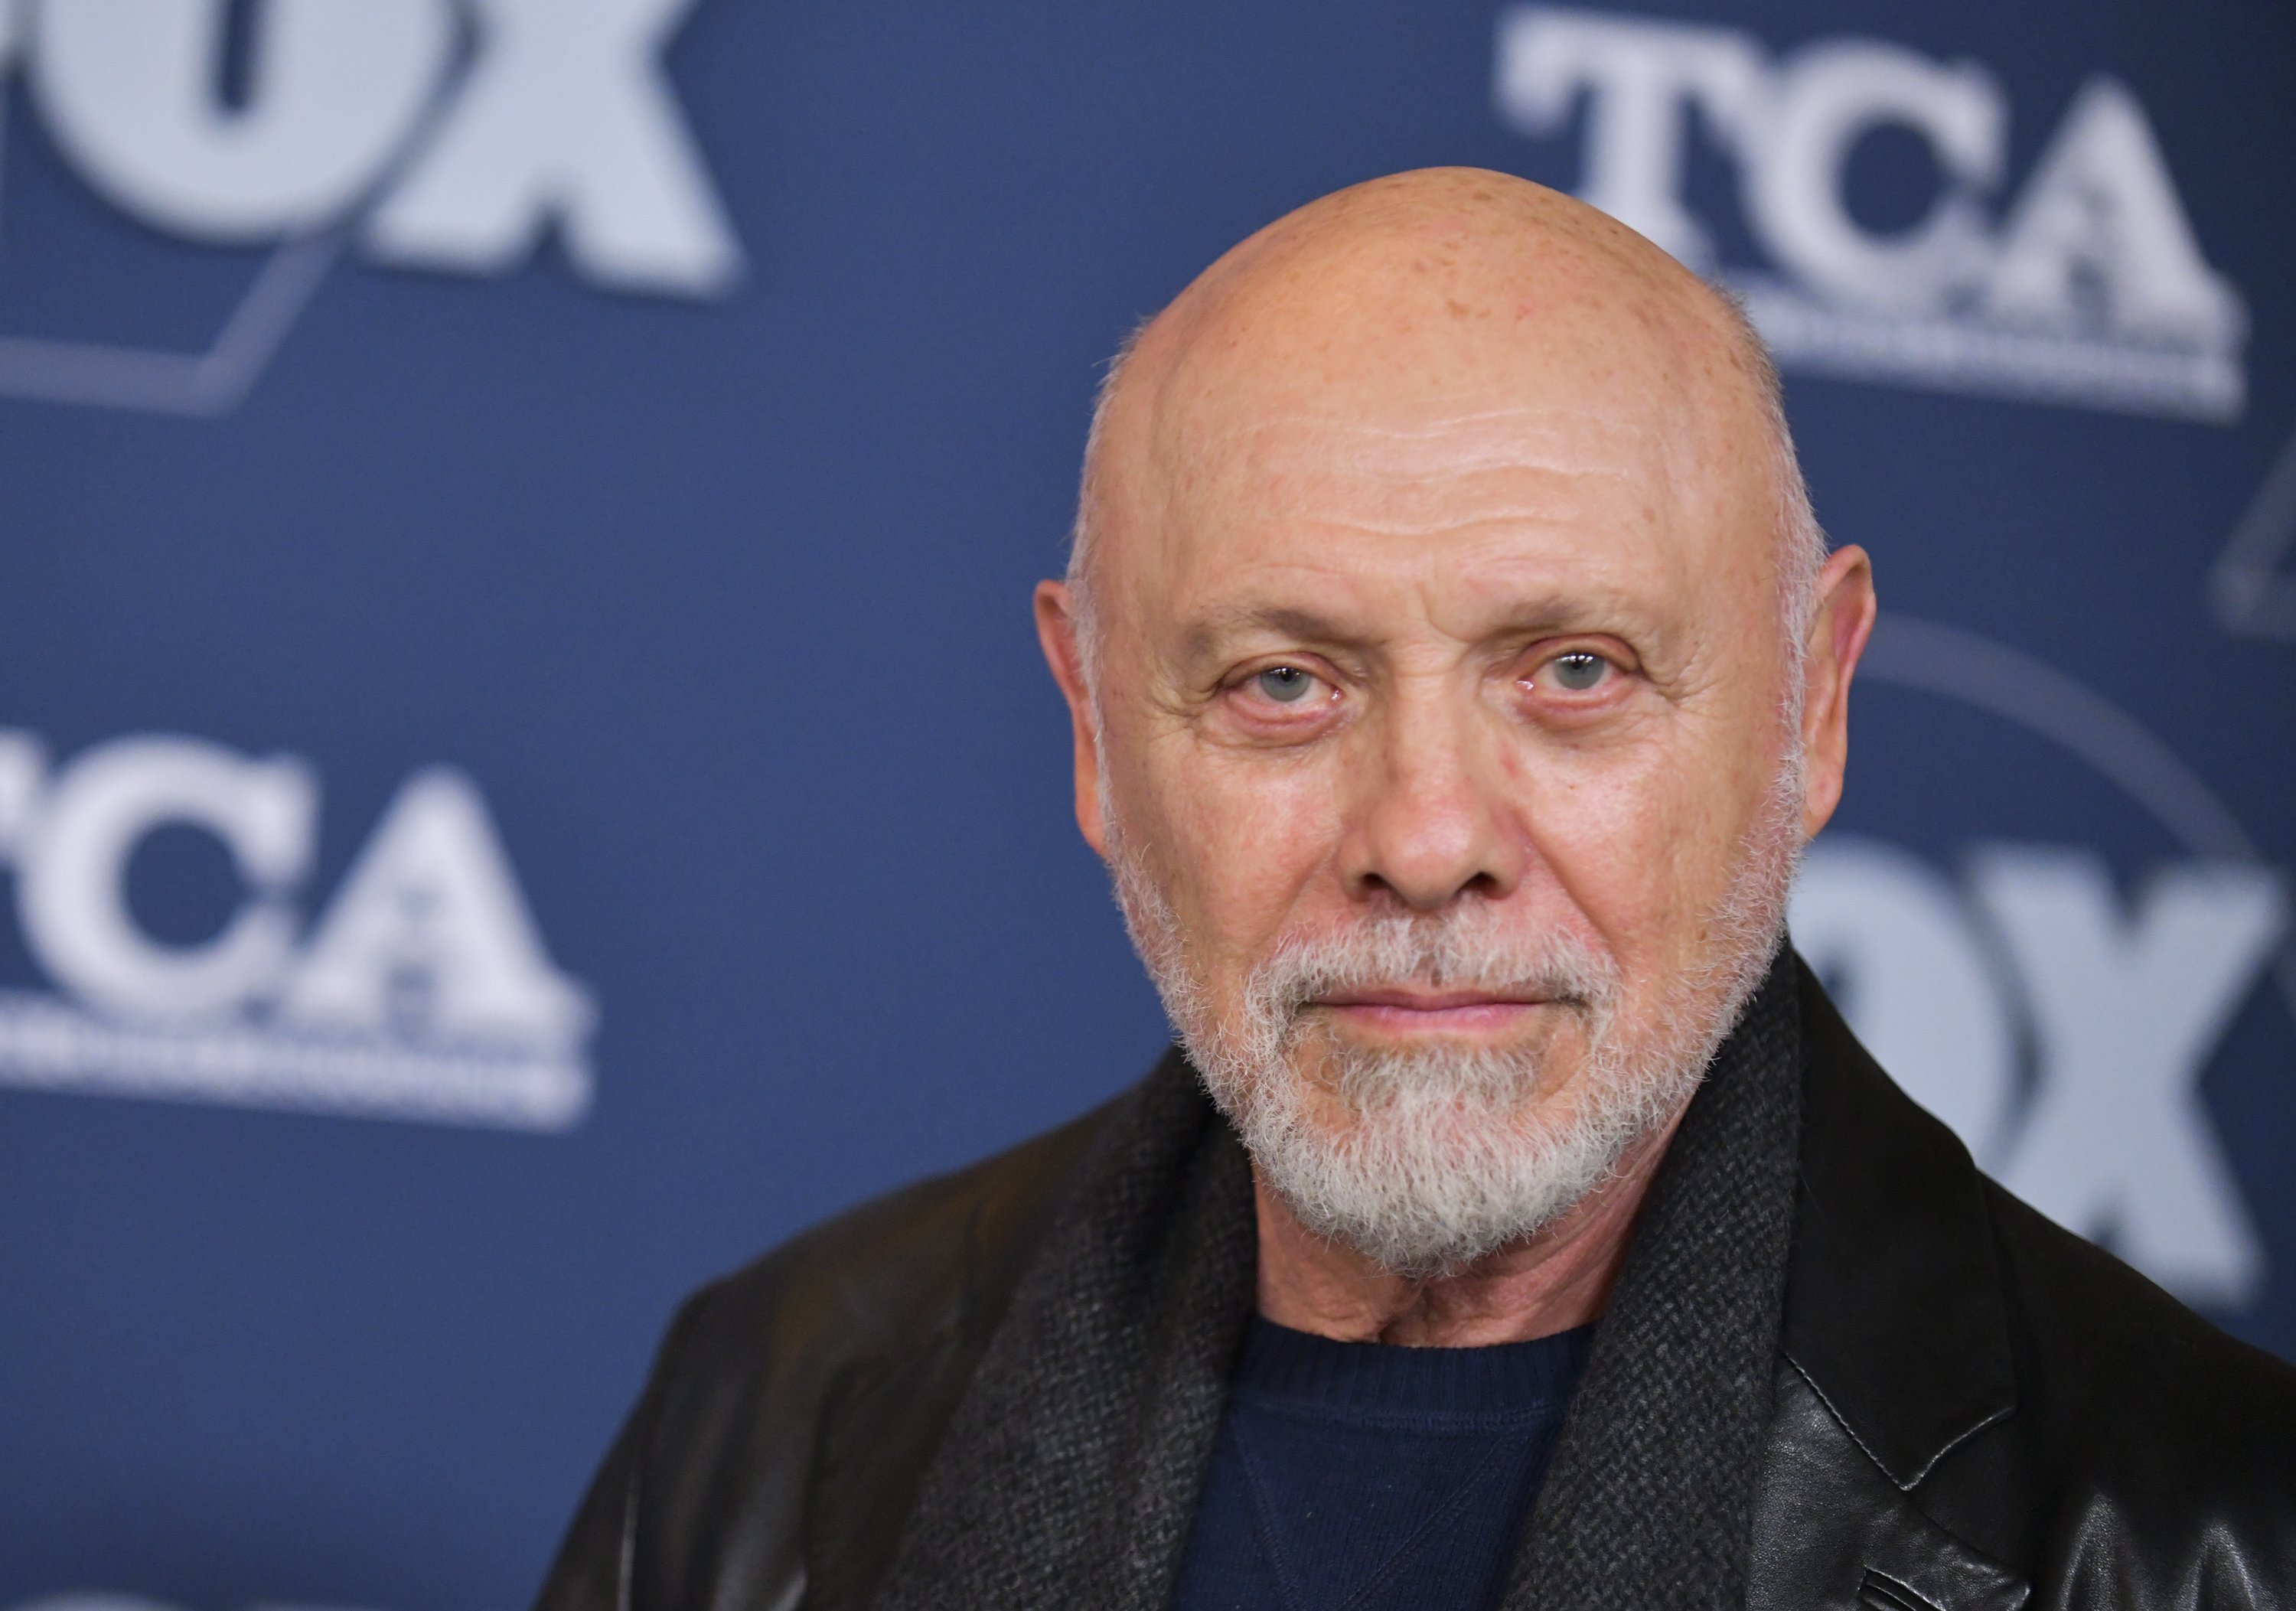 Héctor Elizondo attends the FOX Winter All Star Party at The Langham Huntington, Pasadena on January 07, 2020 in Pasadena, California. | Source: Getty Images